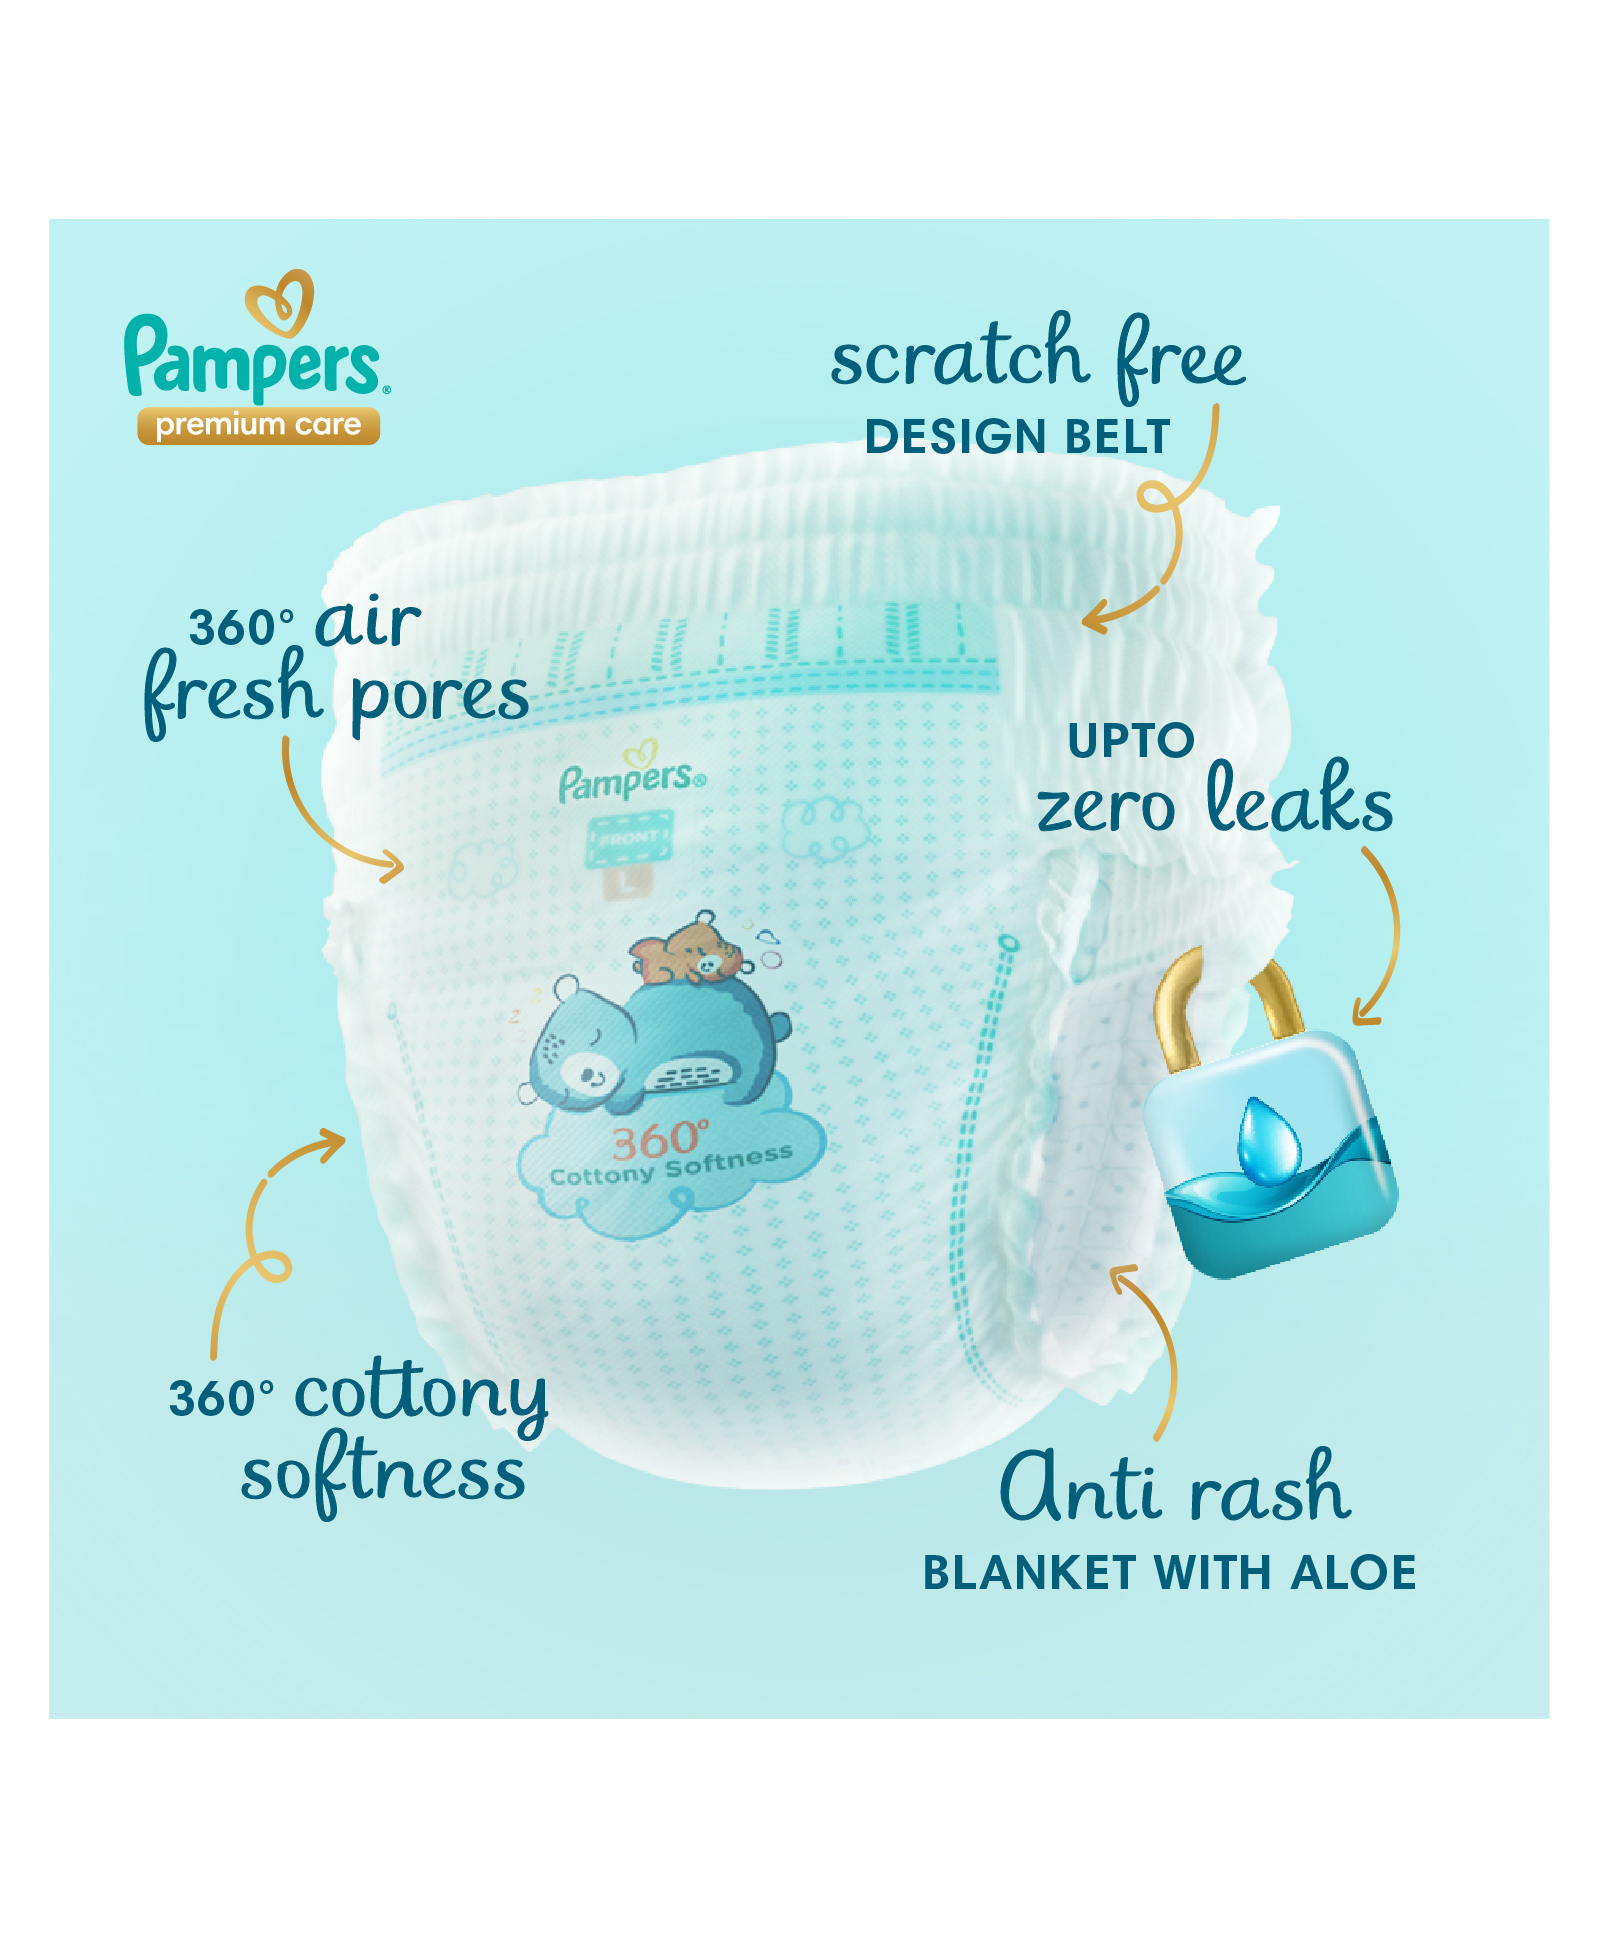 Reusable Baby Diapers And Training Pants Market Report